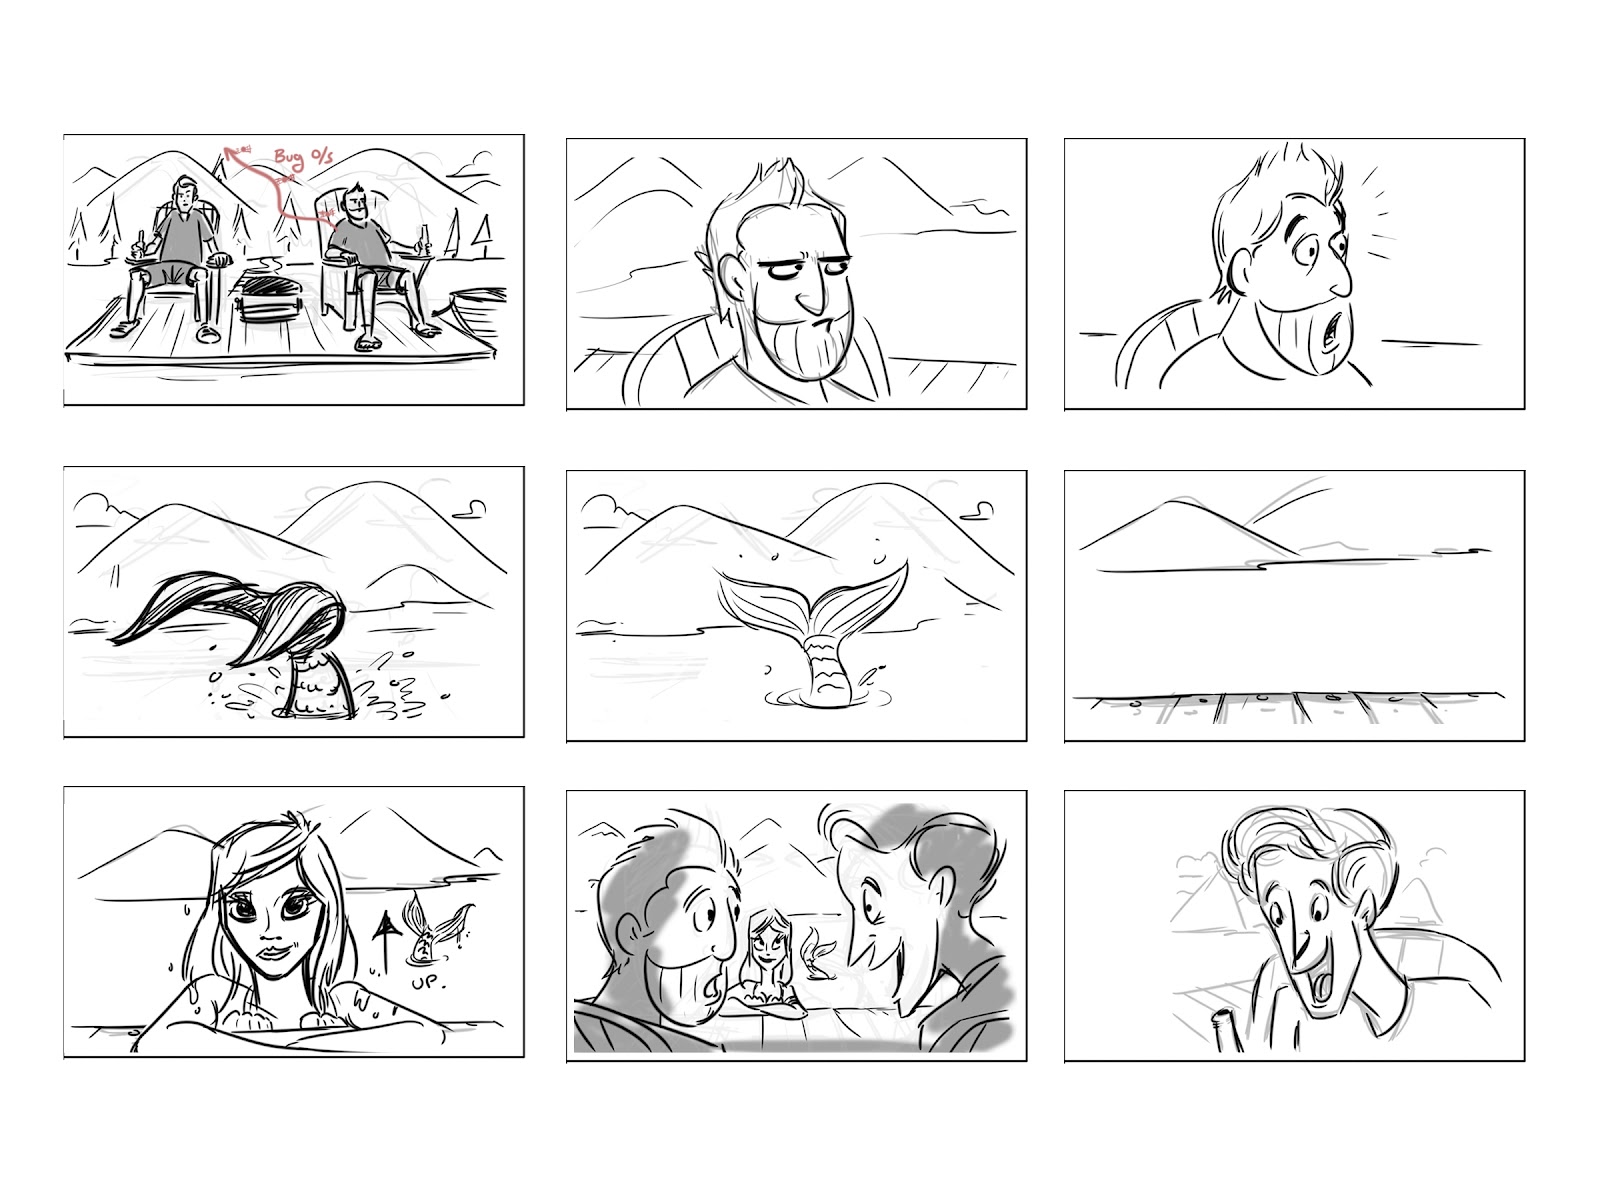 VFX/ Live Action Commercial Storyboard.